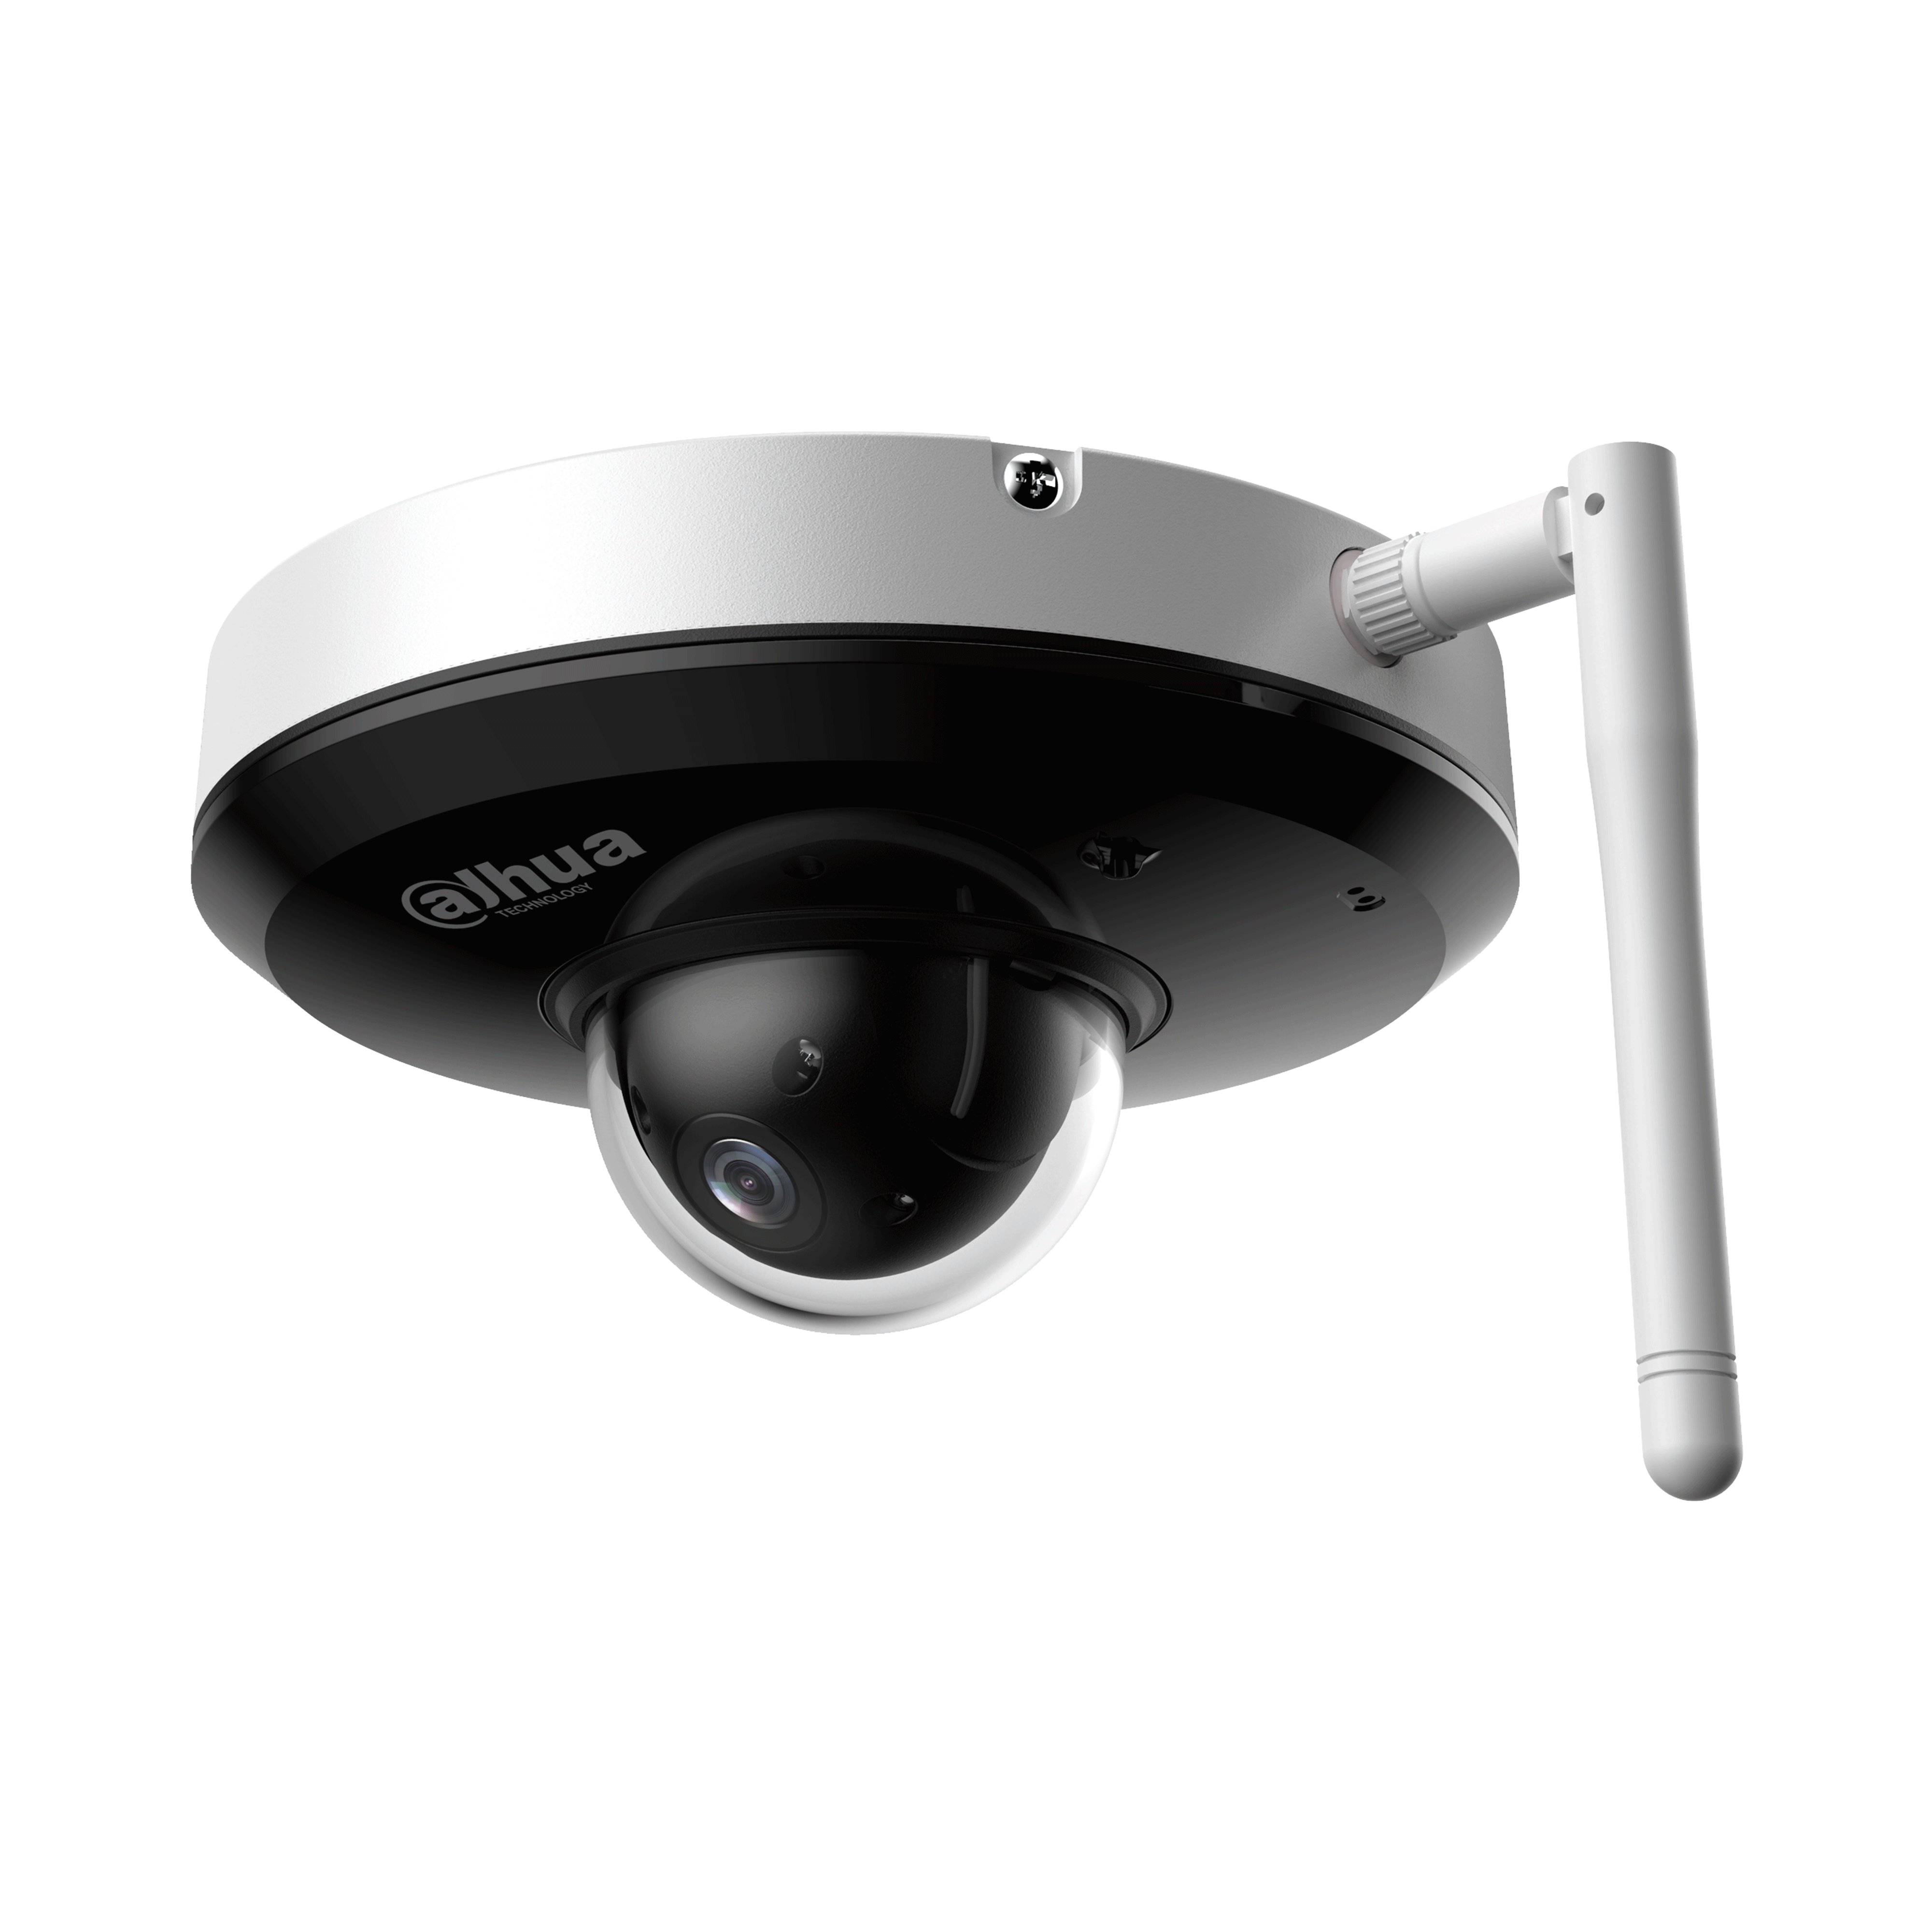 WIZSENSE SERIES IP CAMERA BLACK AI PEOPLE COUNT 4MP H.264/4+/5/5+/ MJPEG MINI PTZ 120 WDR METAL 2.8-12MMMOTORISED LENS 4X ZOOM STARLIGHT IR 20M POE IP67 BUILT IN MIC AUDIO IN AUDIO OUT 1 x ALARM IN 1 x ALARM OUT SUPPORT UP TO 512GB SD IK08 IMPACT RATING 12VDC